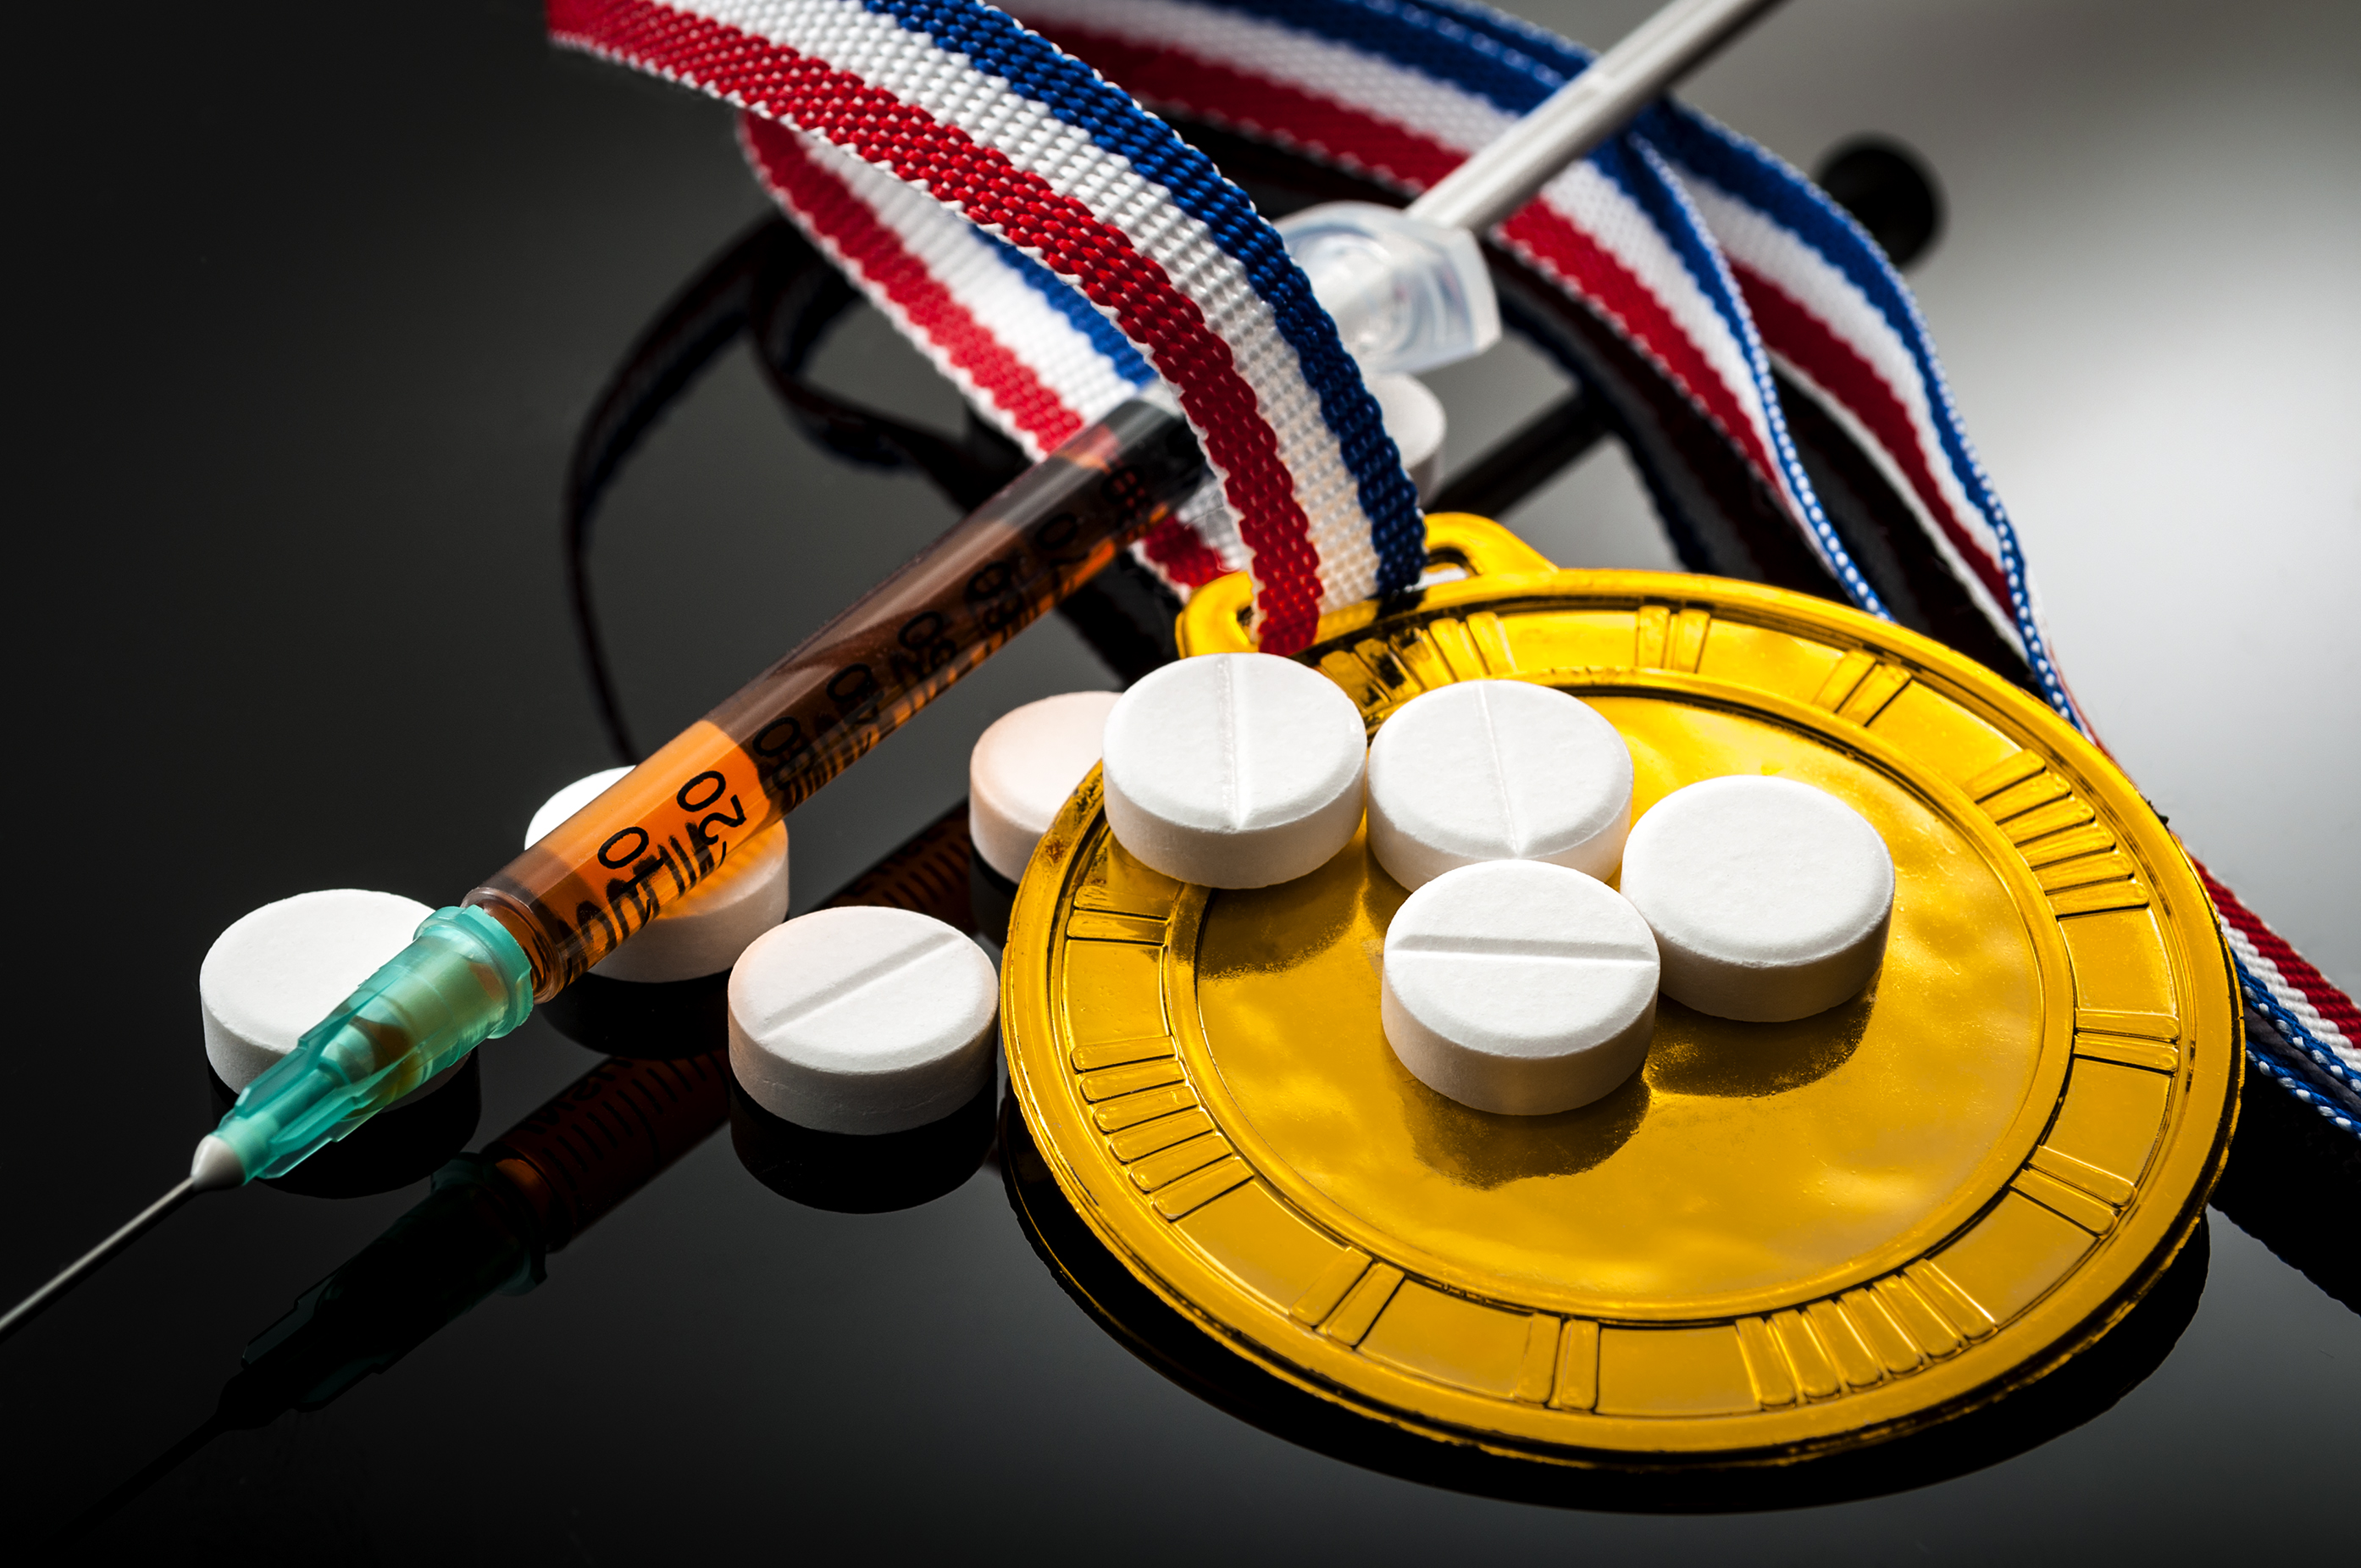 Players won medals by taking banned drugs